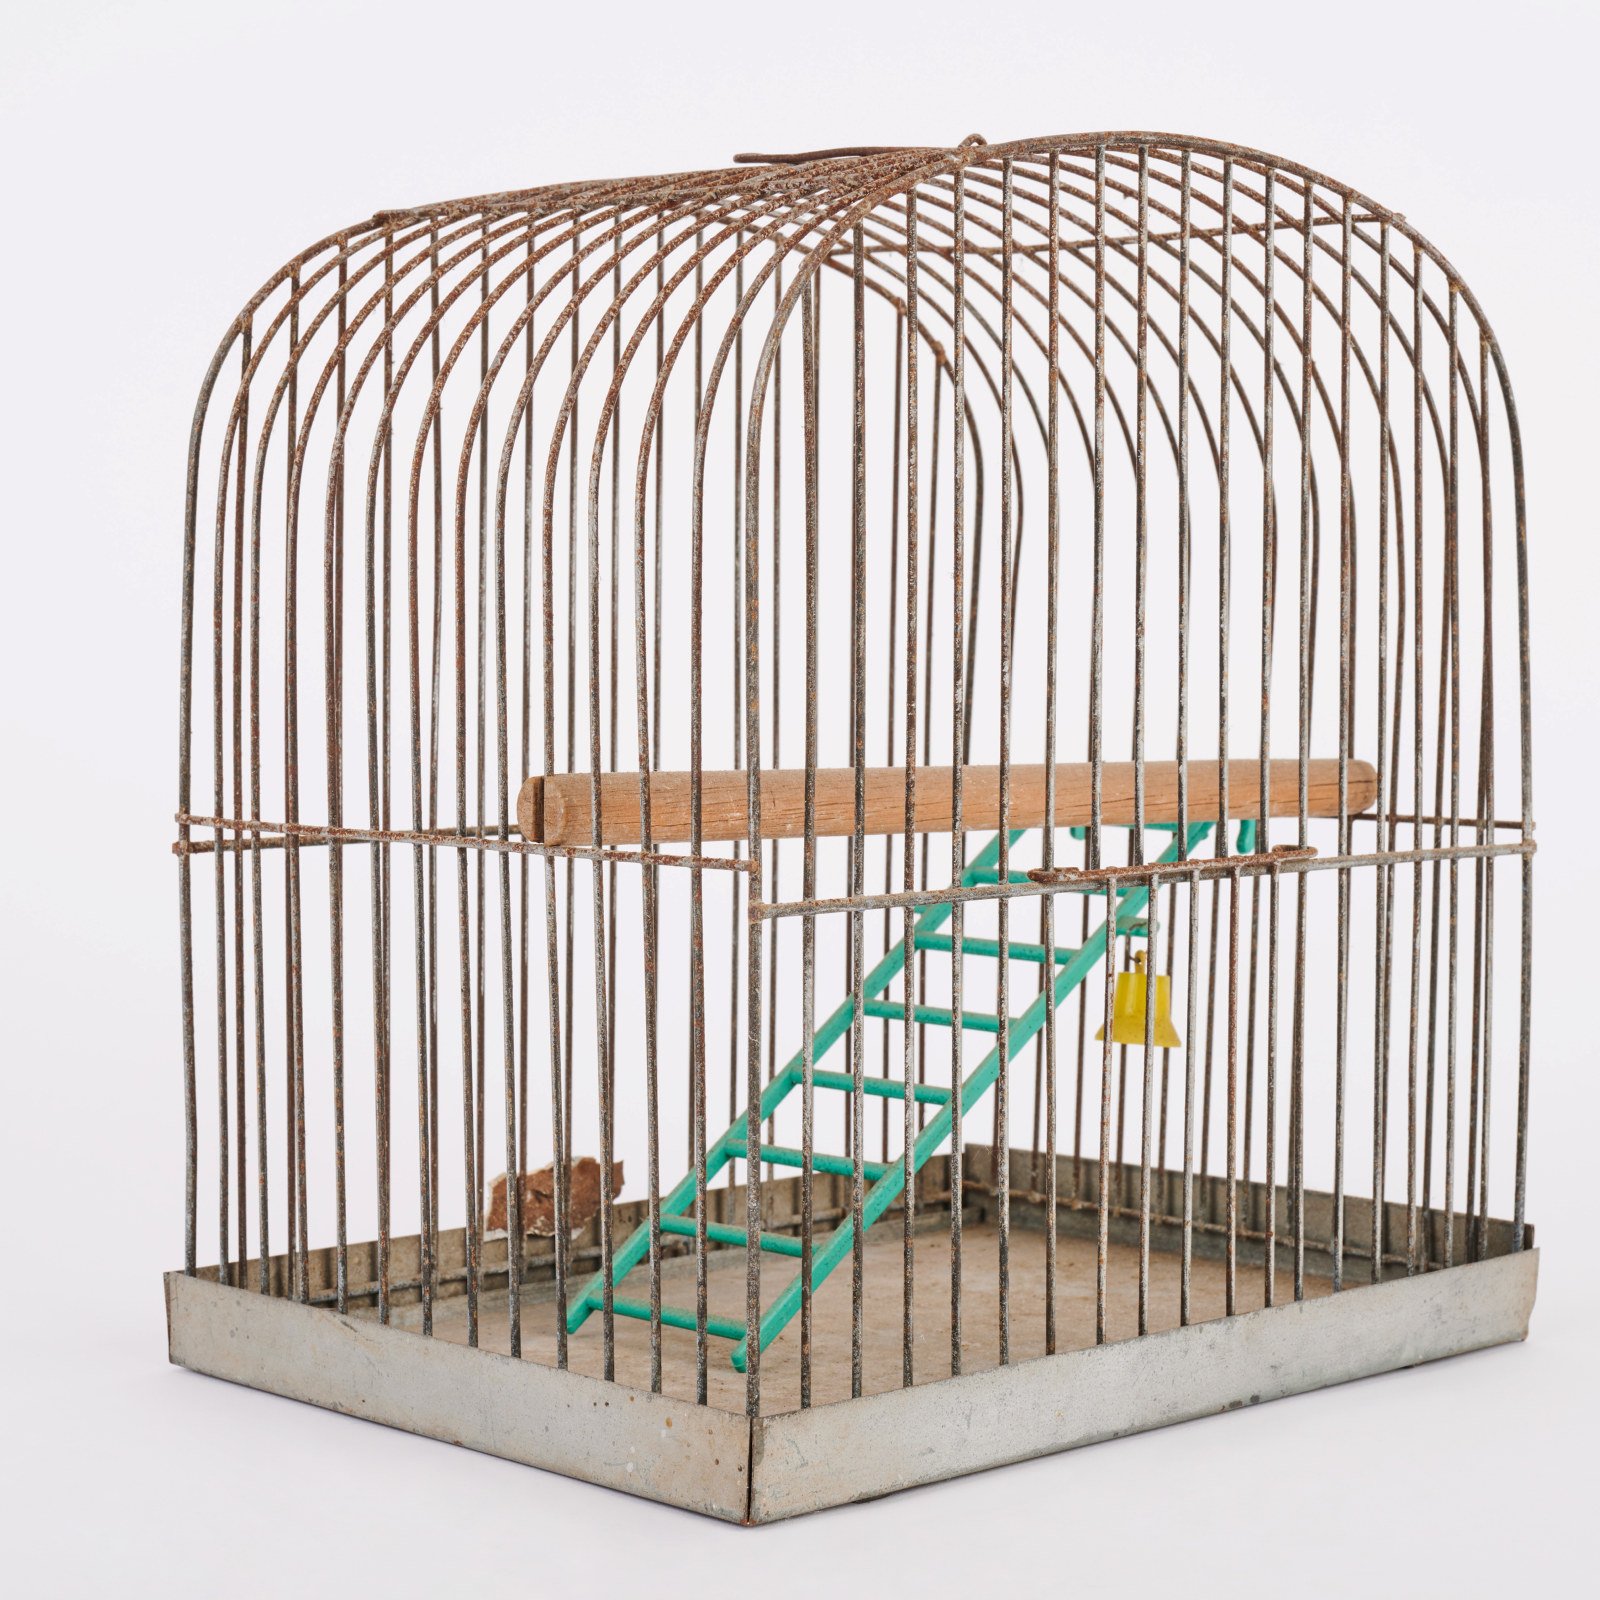 Birdcage, maker unknown, circa 1950s, metal, wire, plastic and organic material